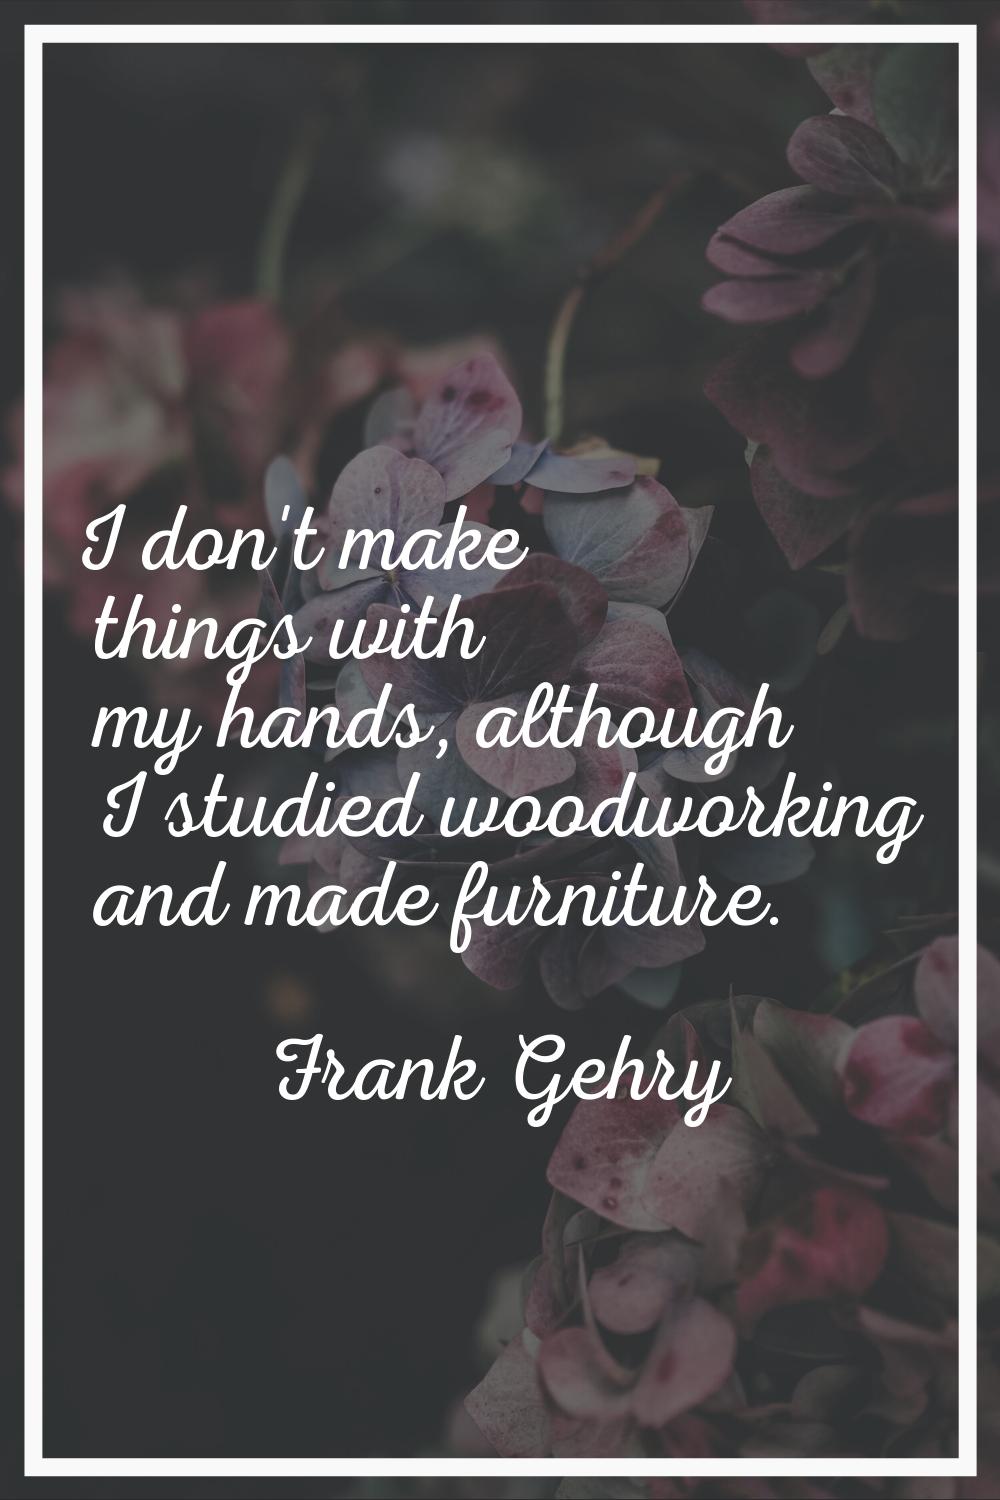 I don't make things with my hands, although I studied woodworking and made furniture.